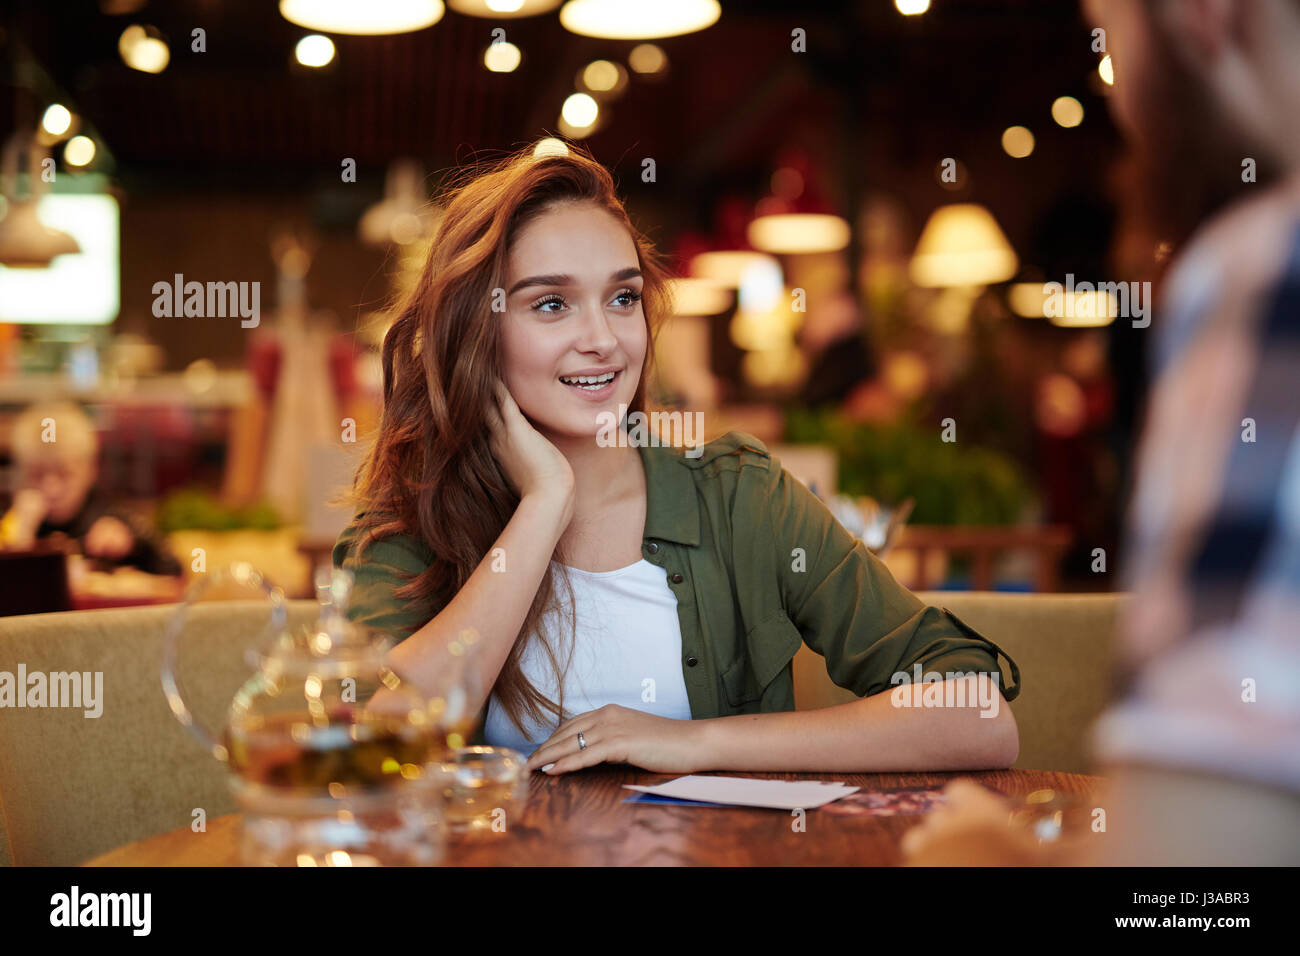 Pretty Woman Having Date in Cafe Stock Photo